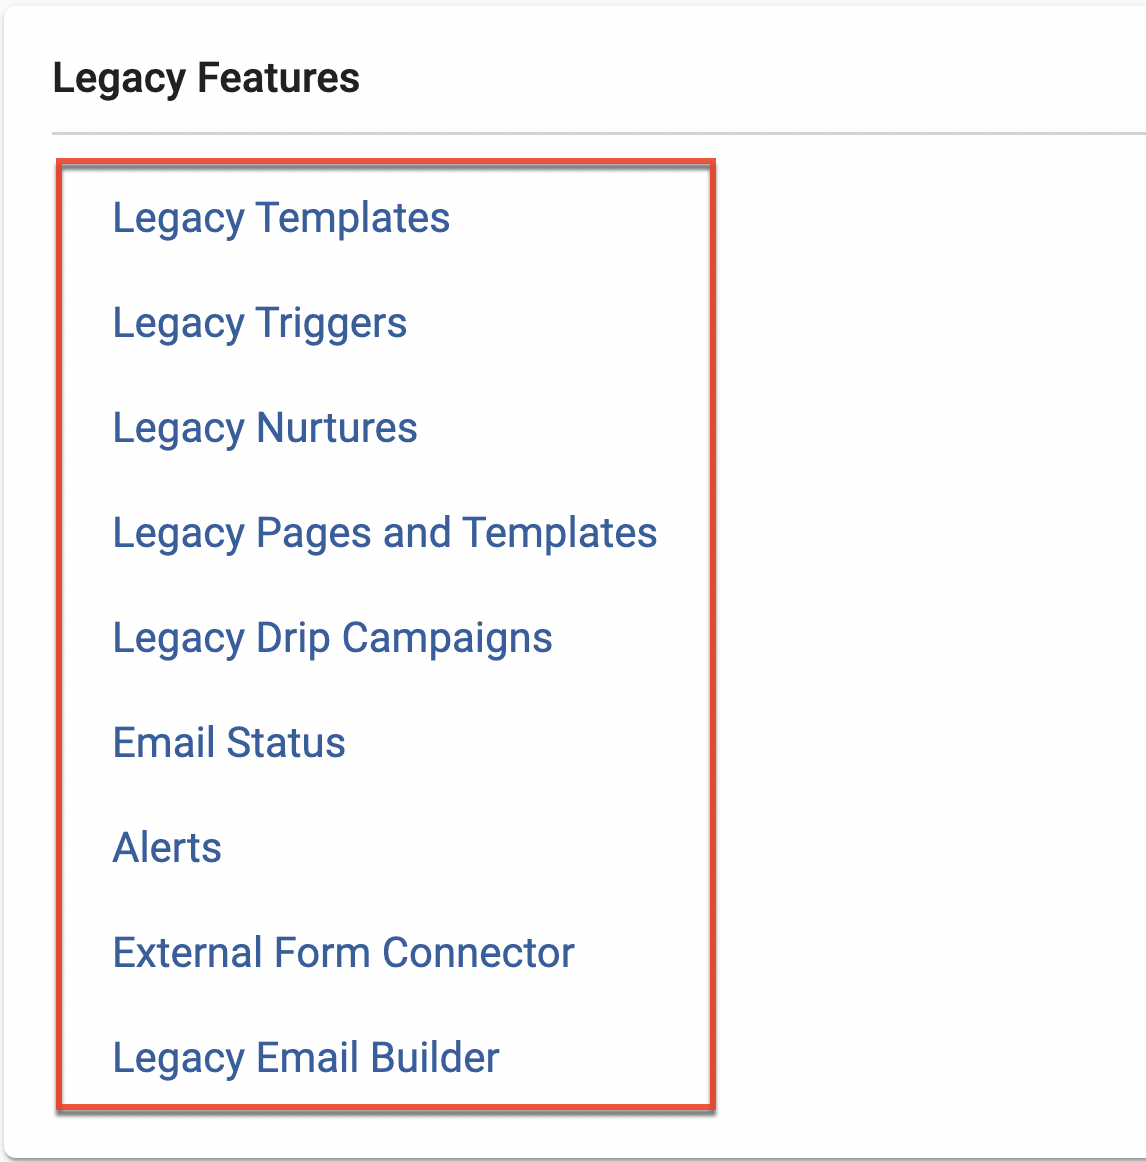 legacyfeaturesection